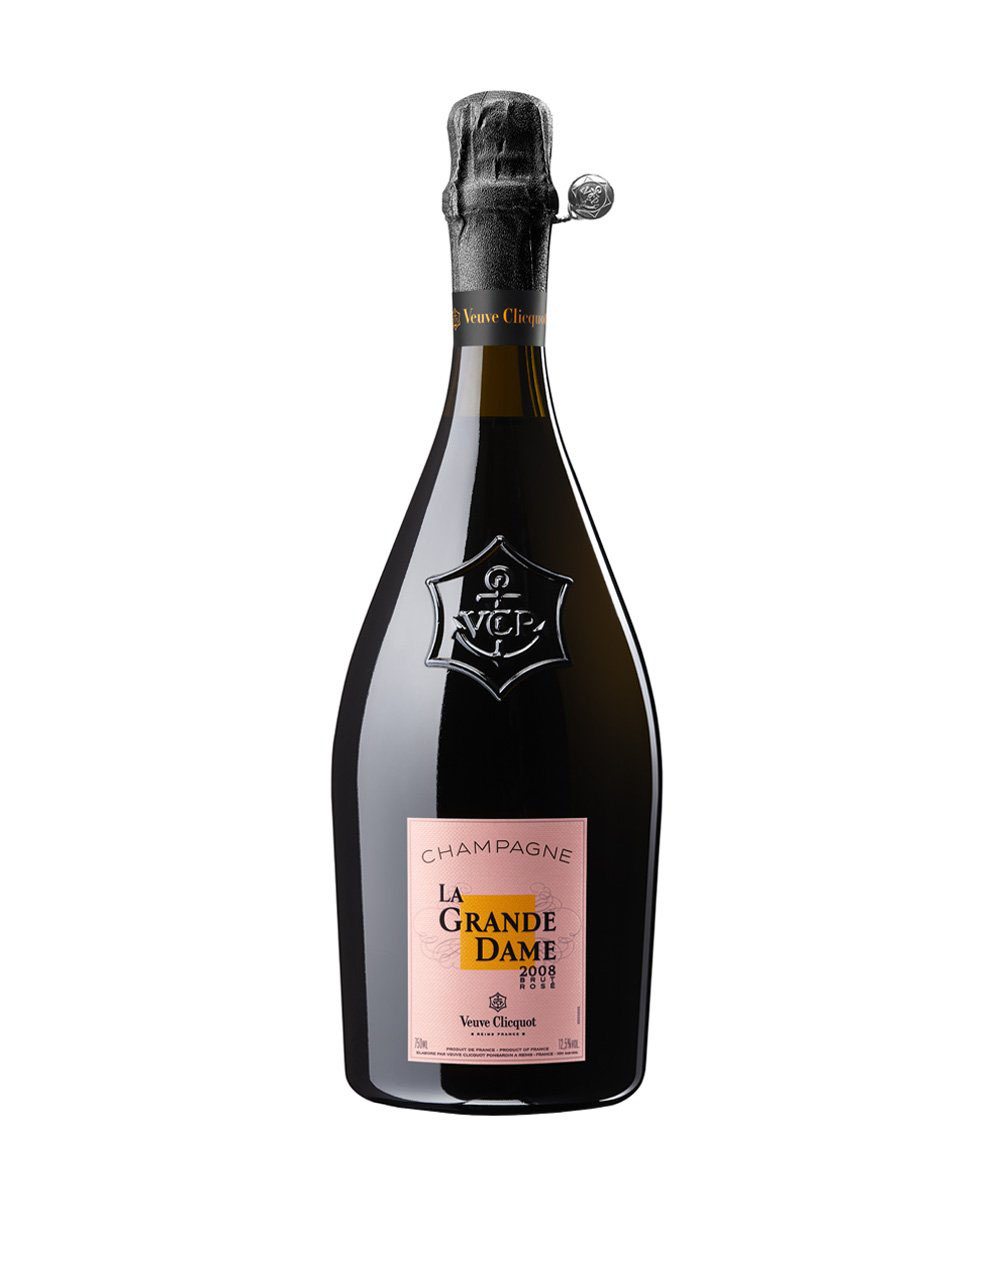 Laurent Perrier Cuvee Rose with Silhouette Tin